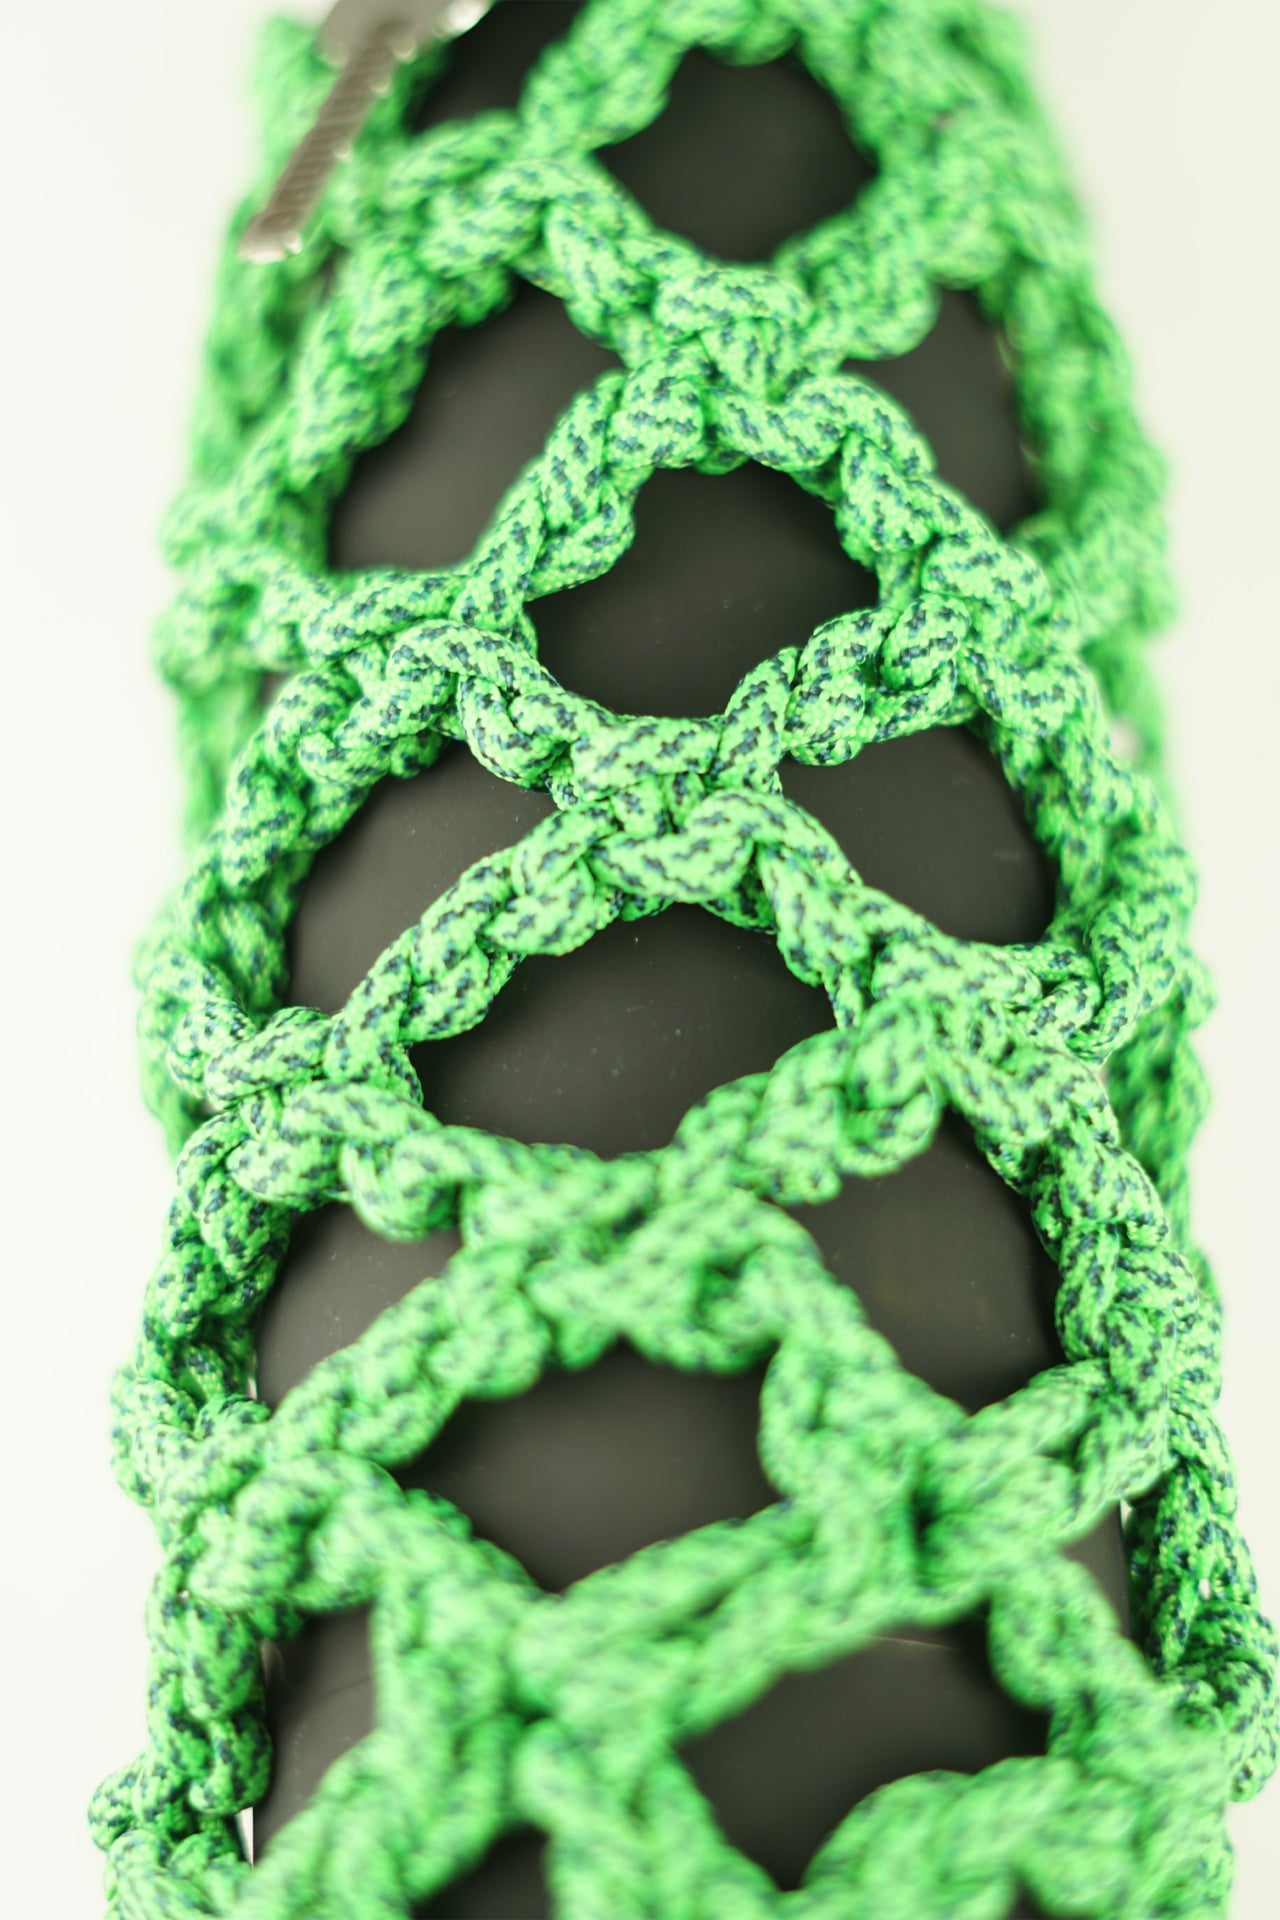 Green bottle carrier made of paracord rope